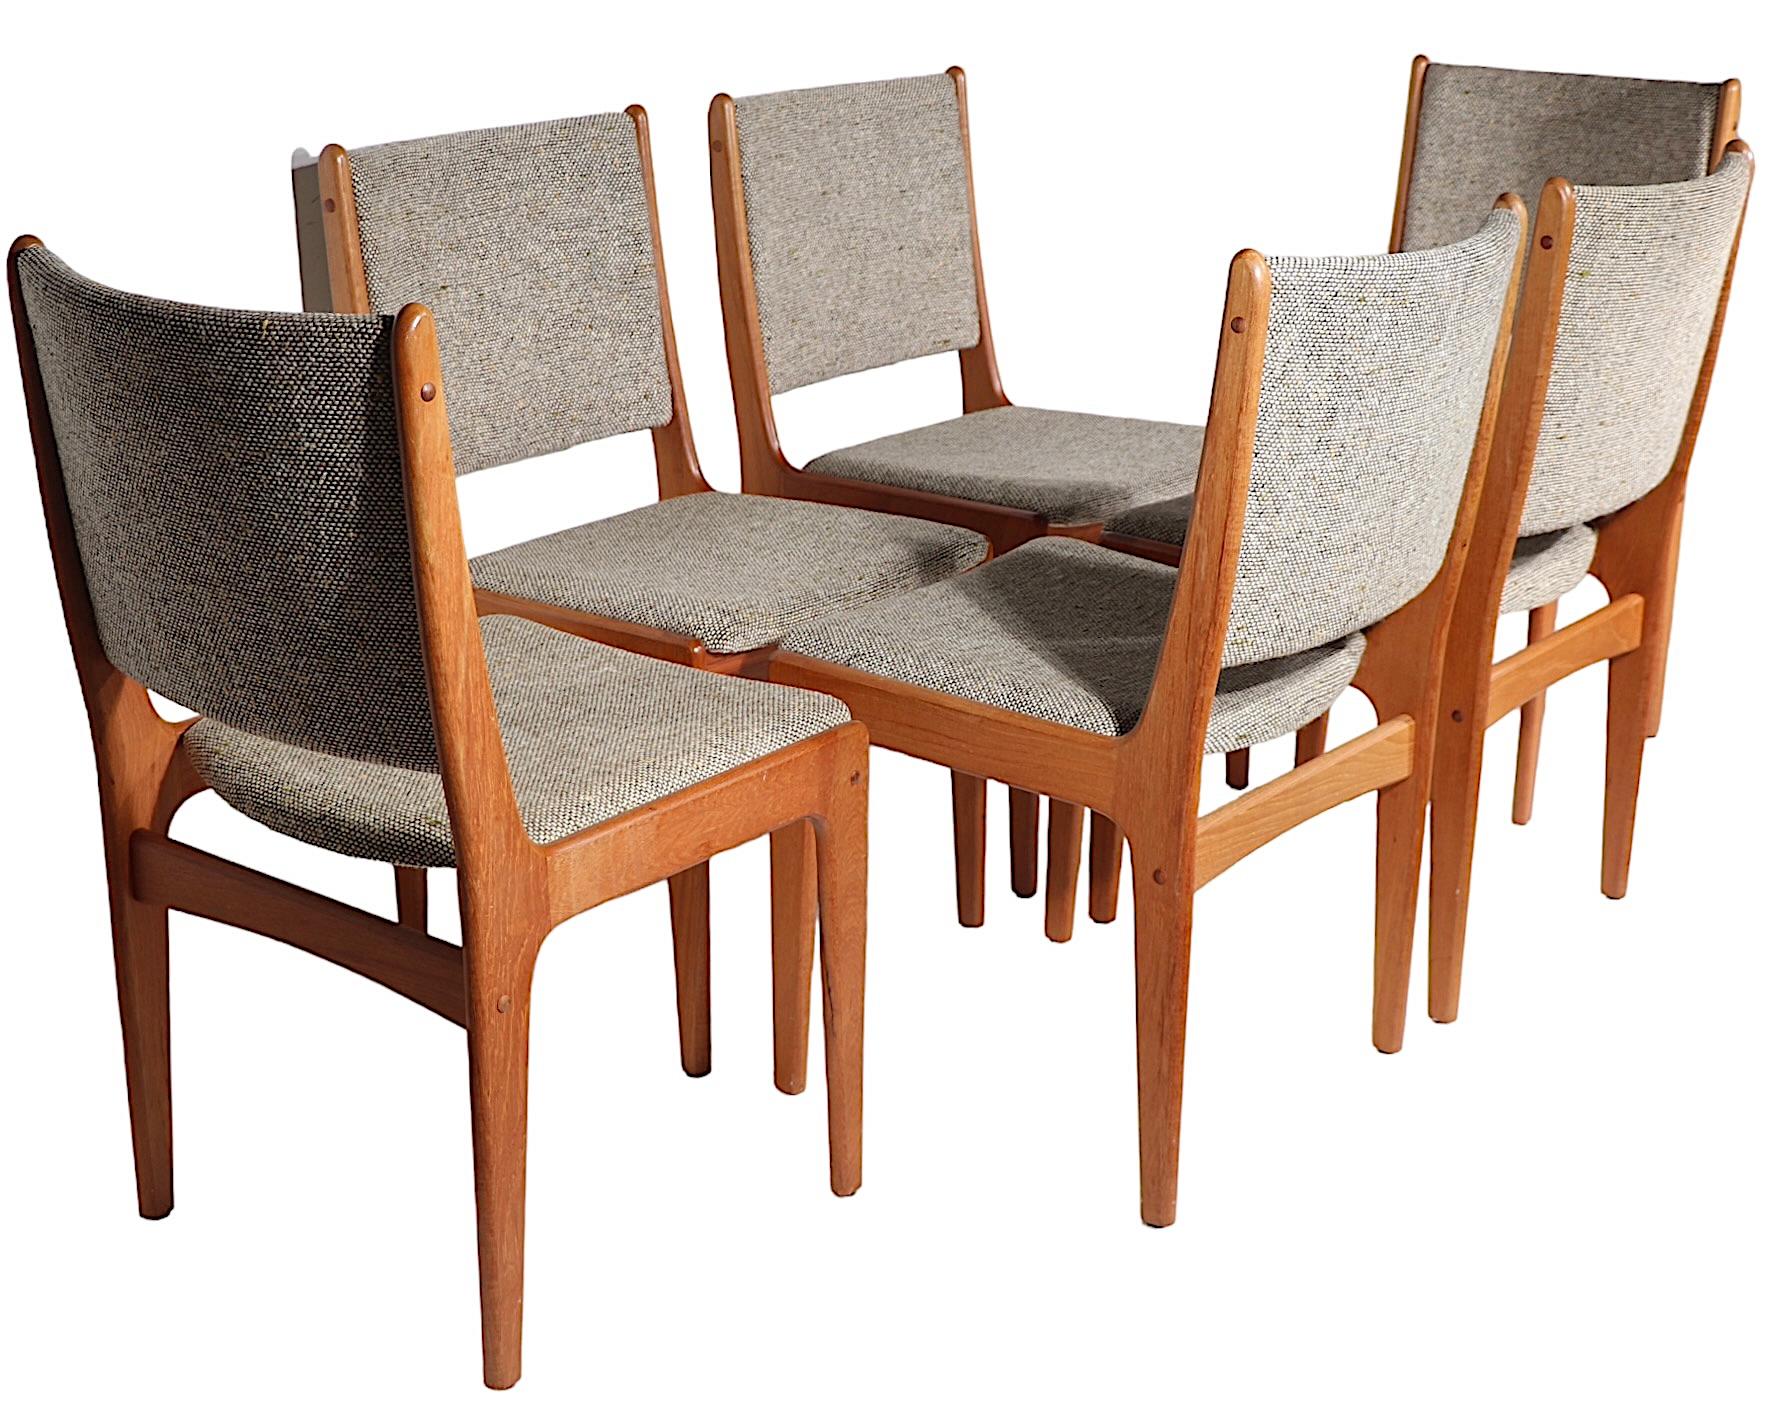 Danish Mid Century Modern Dining Chairs by Johannes Andersen for Uldum Mobler  In Good Condition For Sale In New York, NY